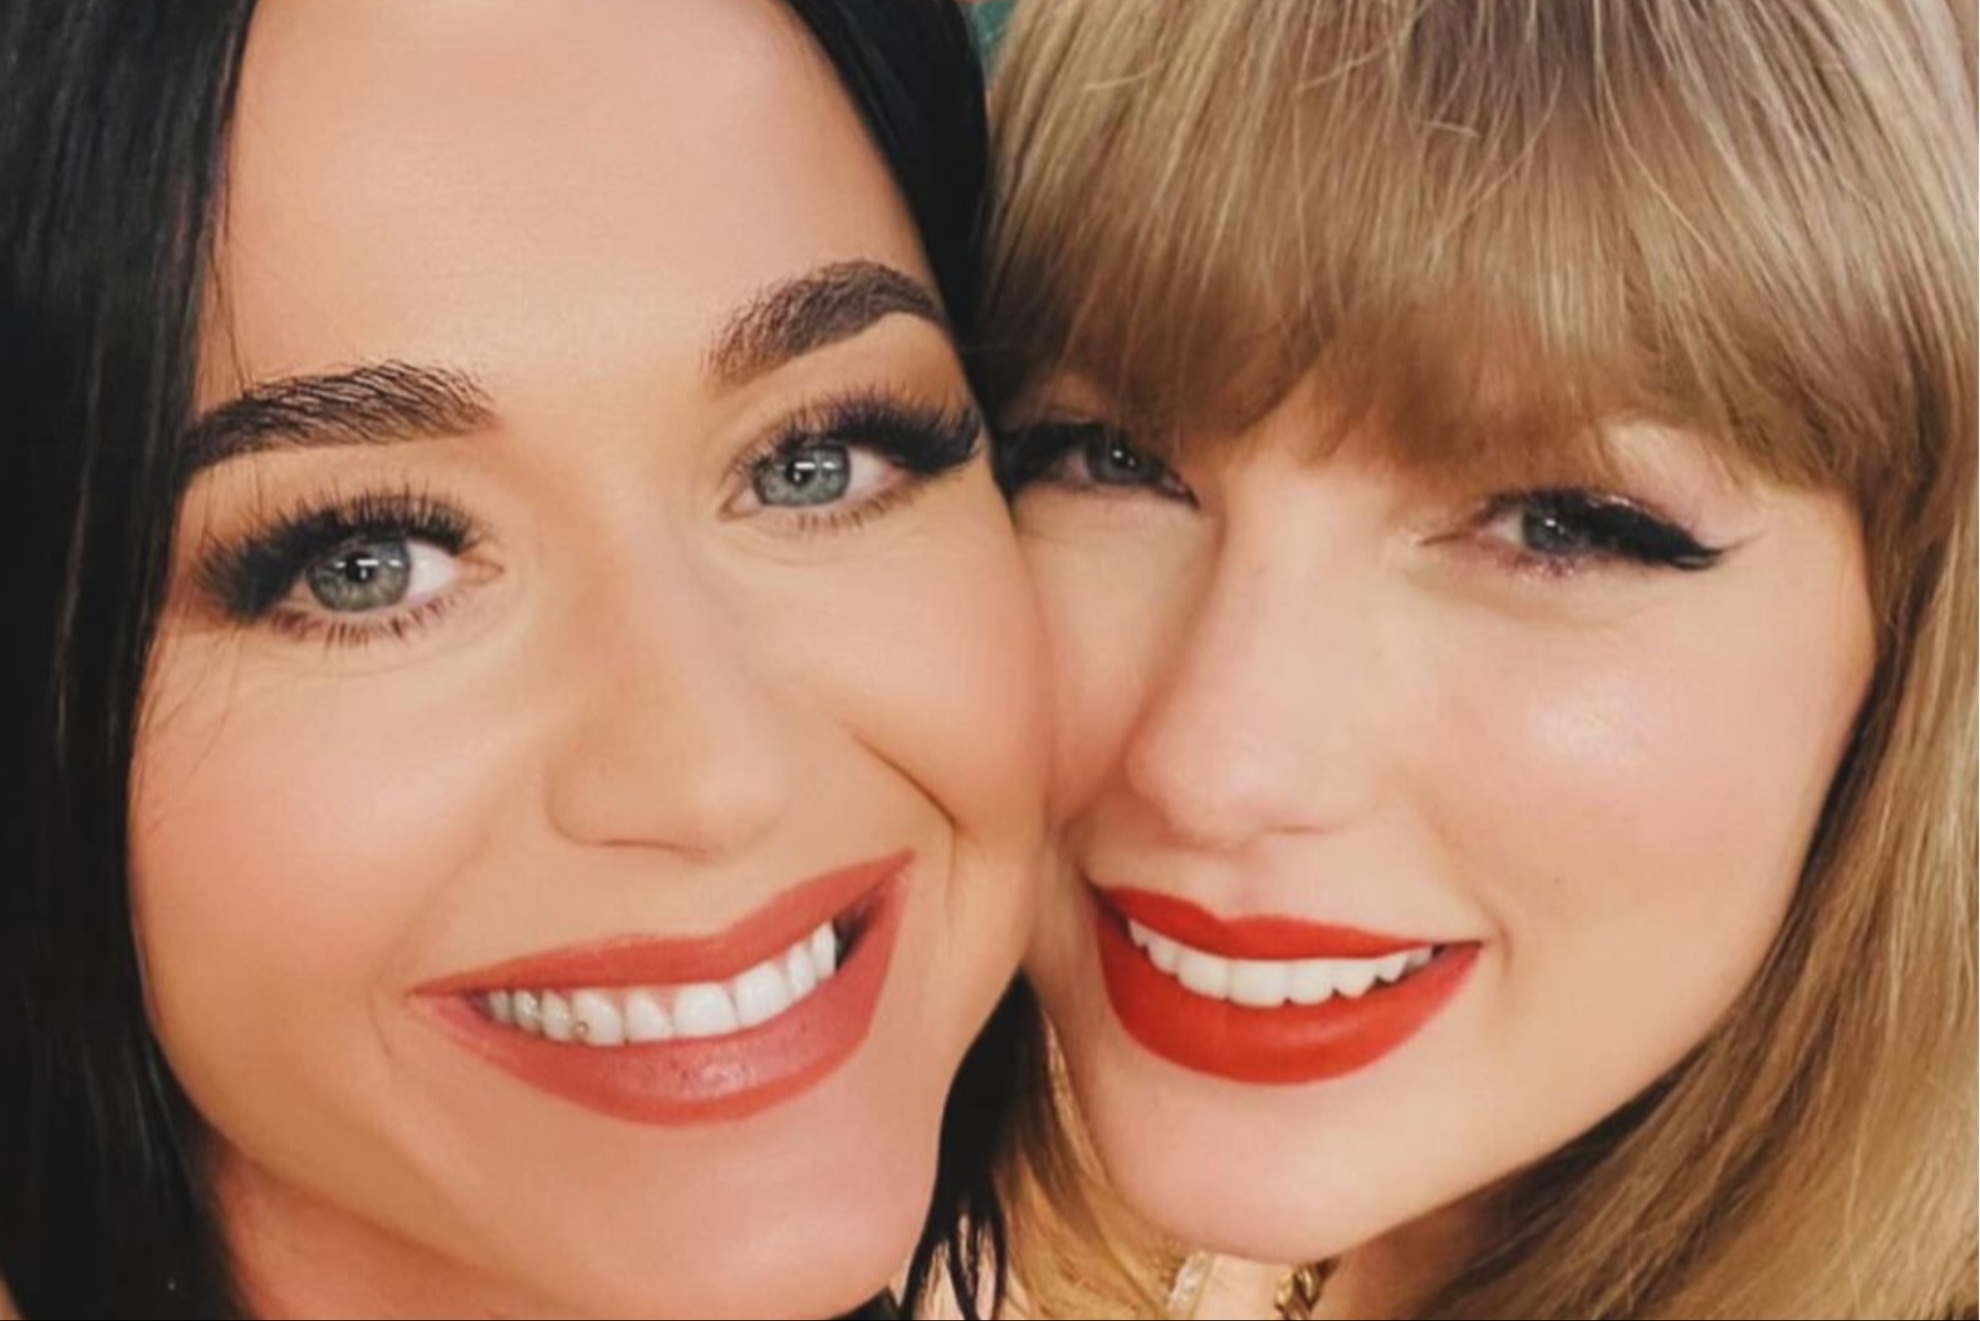 Pop superstars and old-time friends Katy Perry and Taylor Swift.